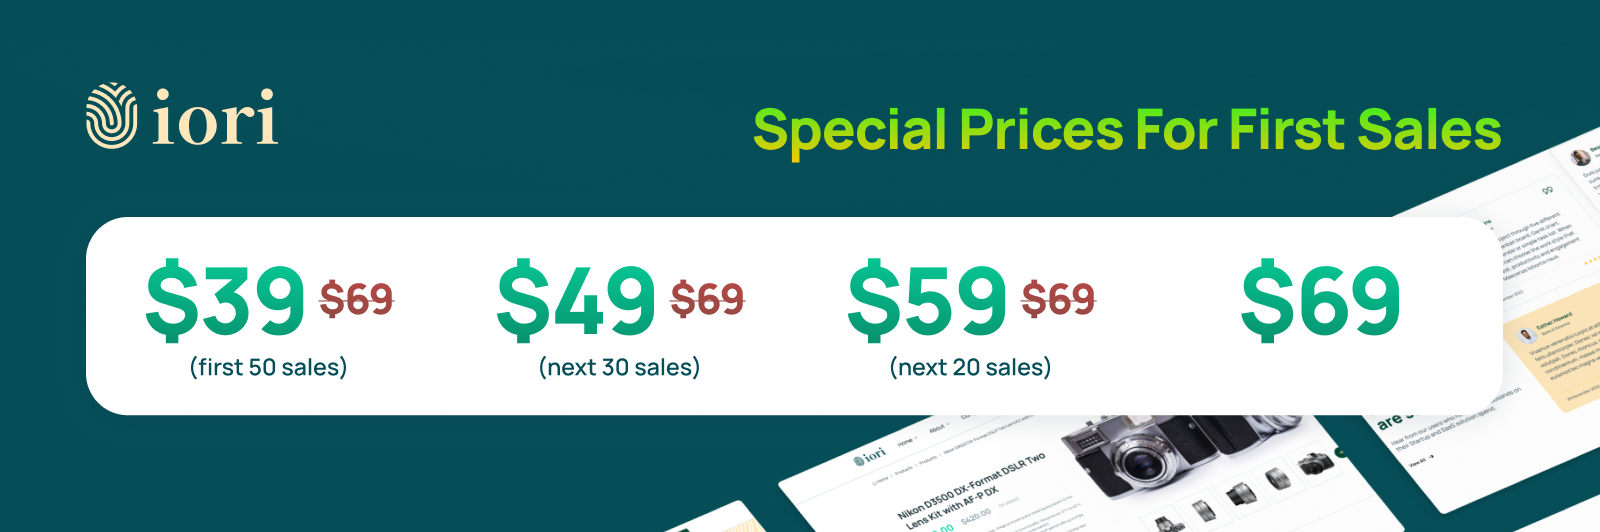 Special Prices for First Sales